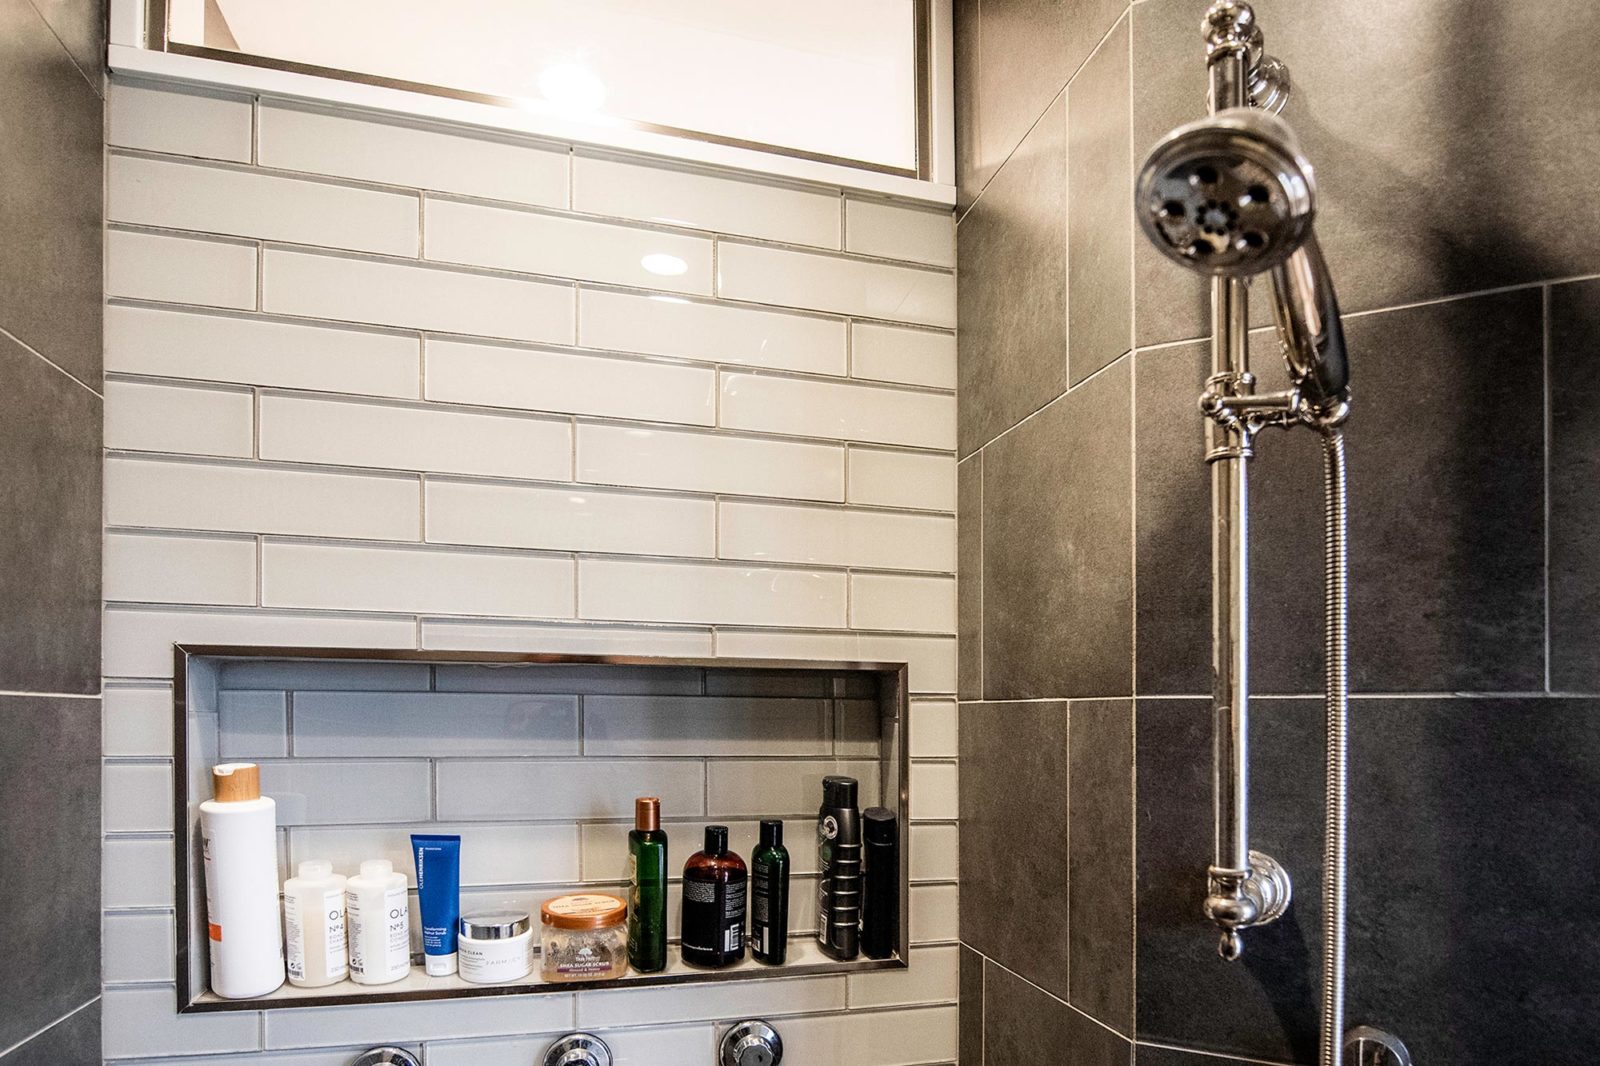 Inside of a shower with white and grey tile walls, silver shower head, and shower products on shelf